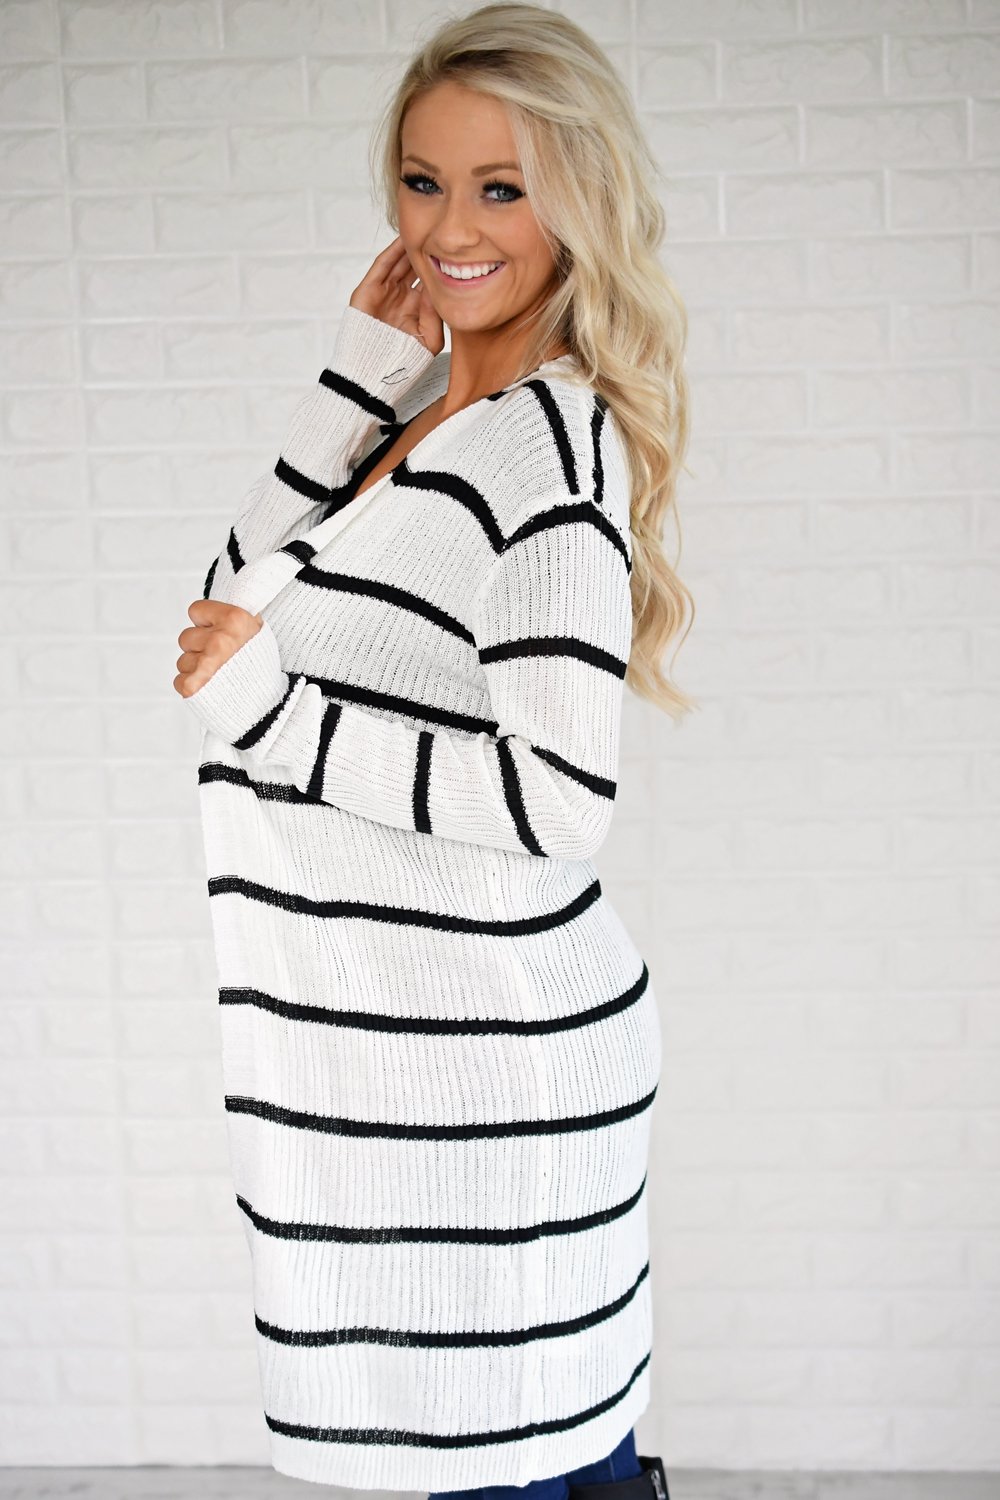 Long Black and White Striped Cardigan